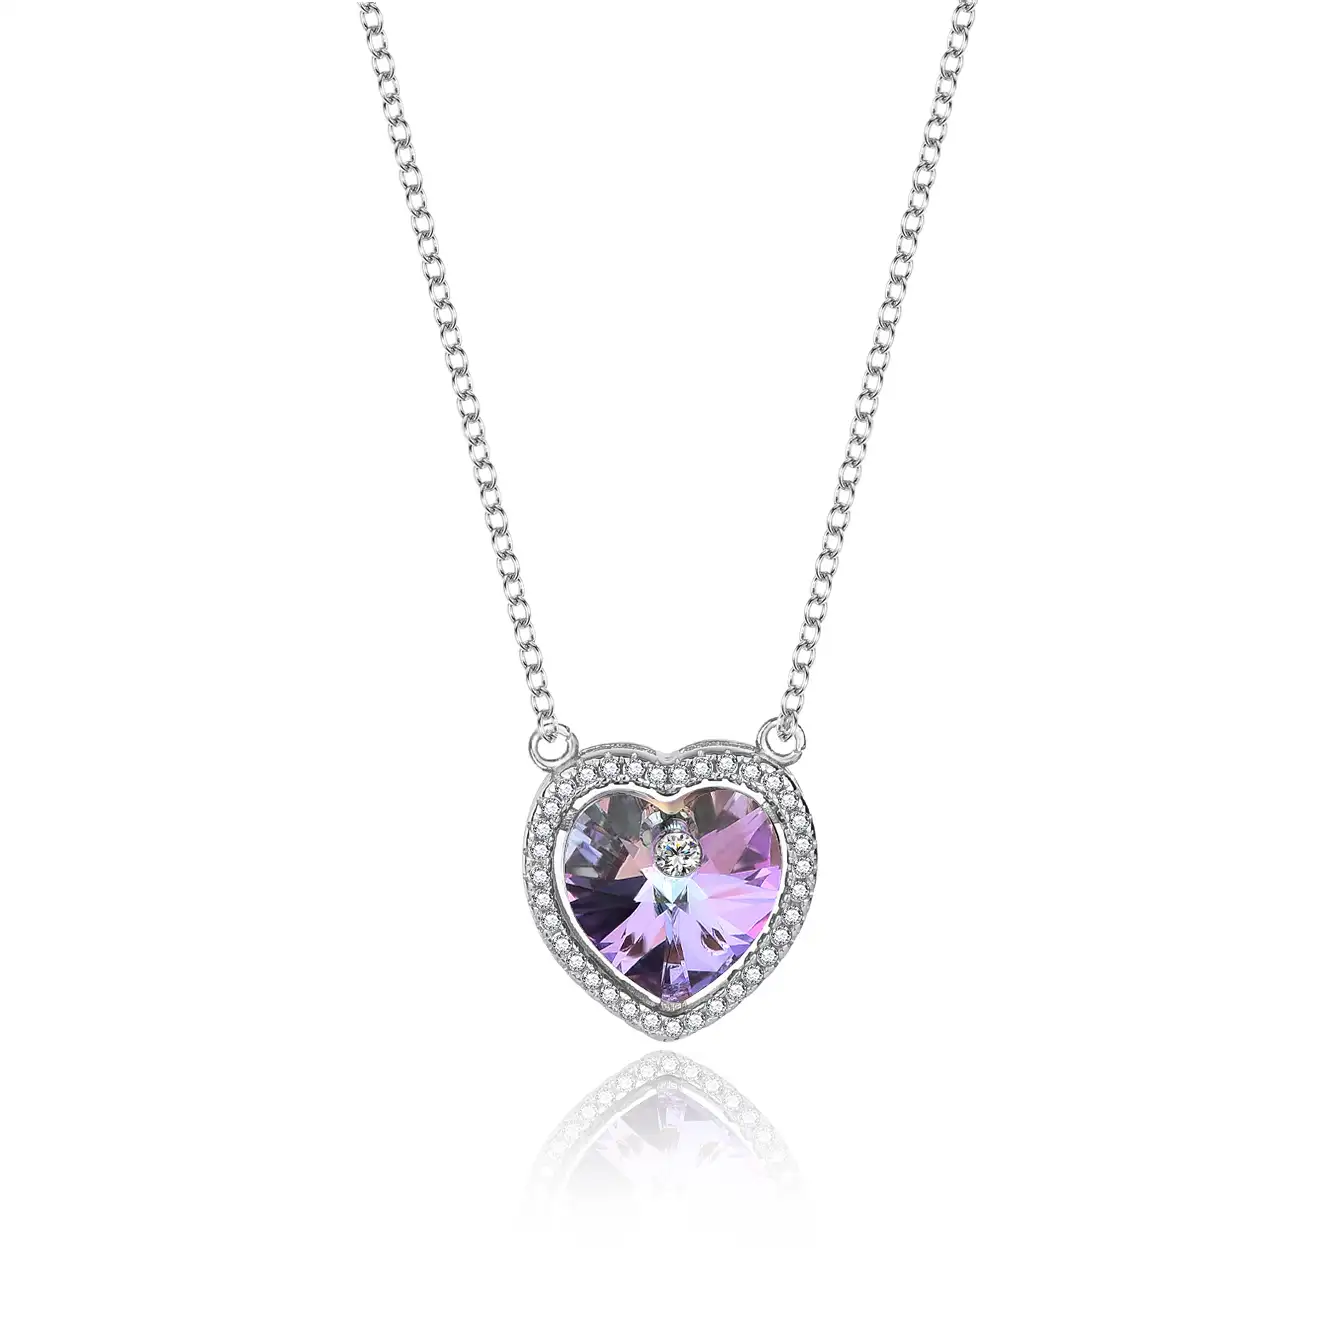 Crystals from Swarovski Love Heart Cubic Zirconia Pendant Necklace 80200069